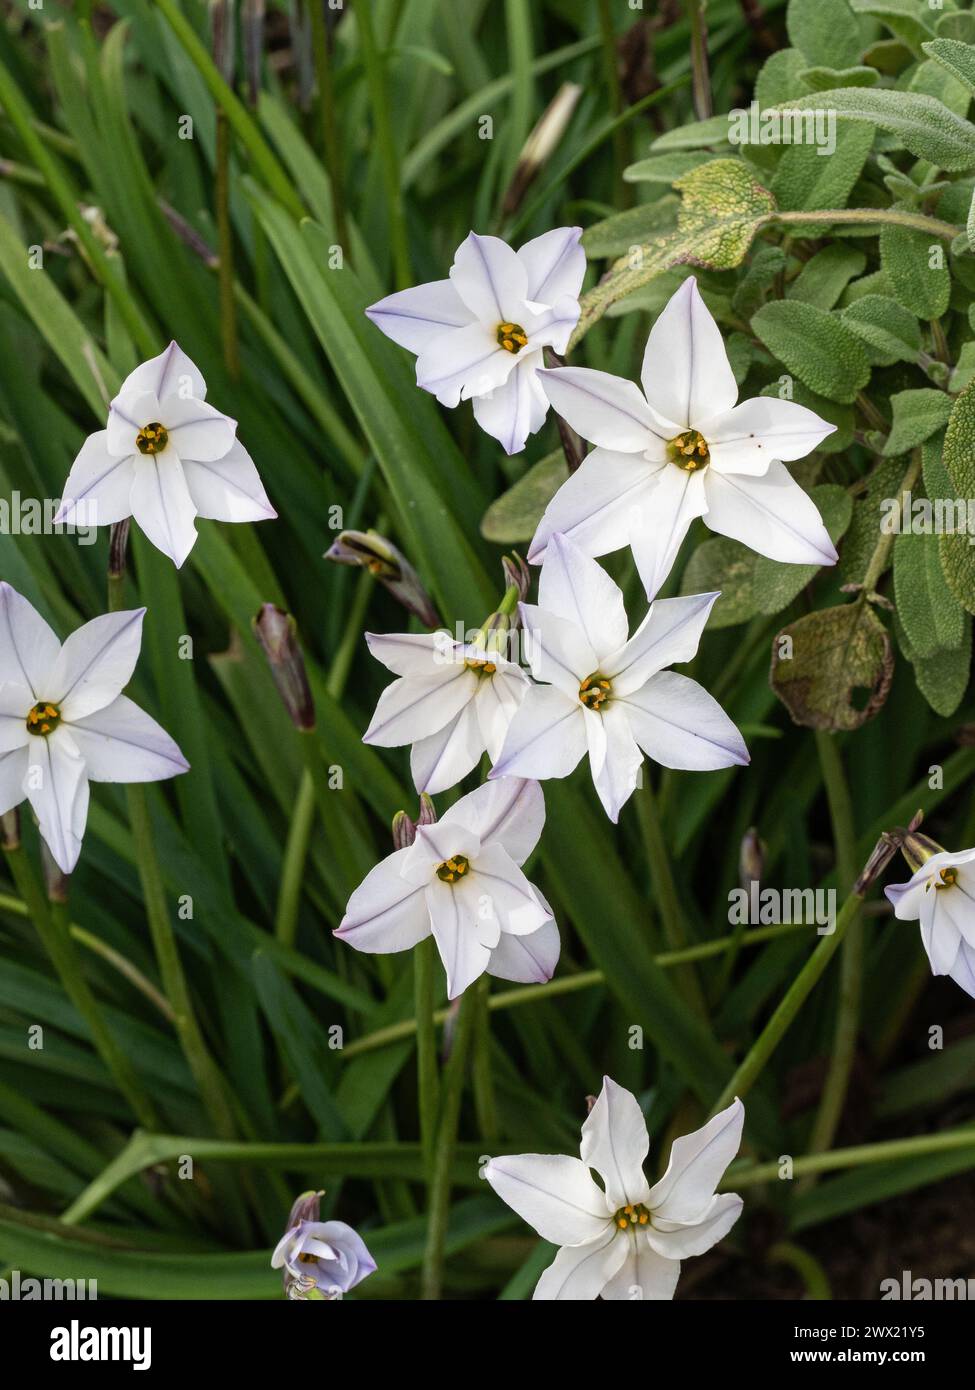 A group of flowers of the spring flowering Ipheion uniflorum subsp. tandiliense showing the blue marking on the near white flowers Stock Photo